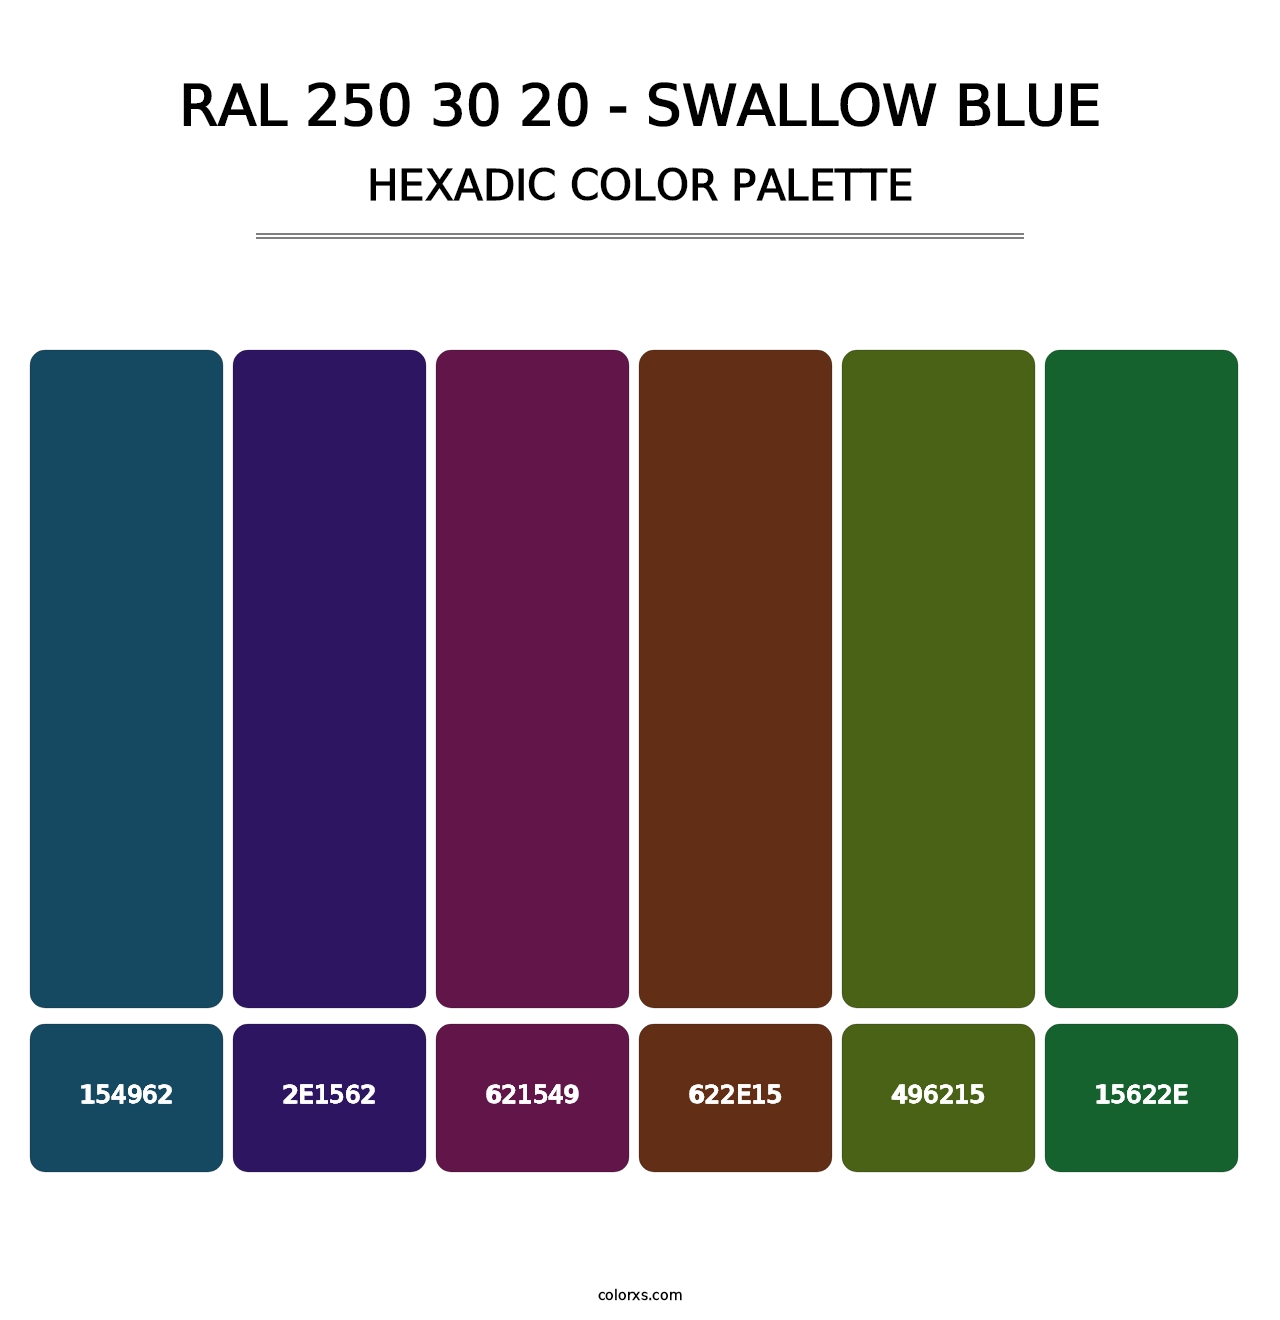 RAL 250 30 20 - Swallow Blue - Hexadic Color Palette